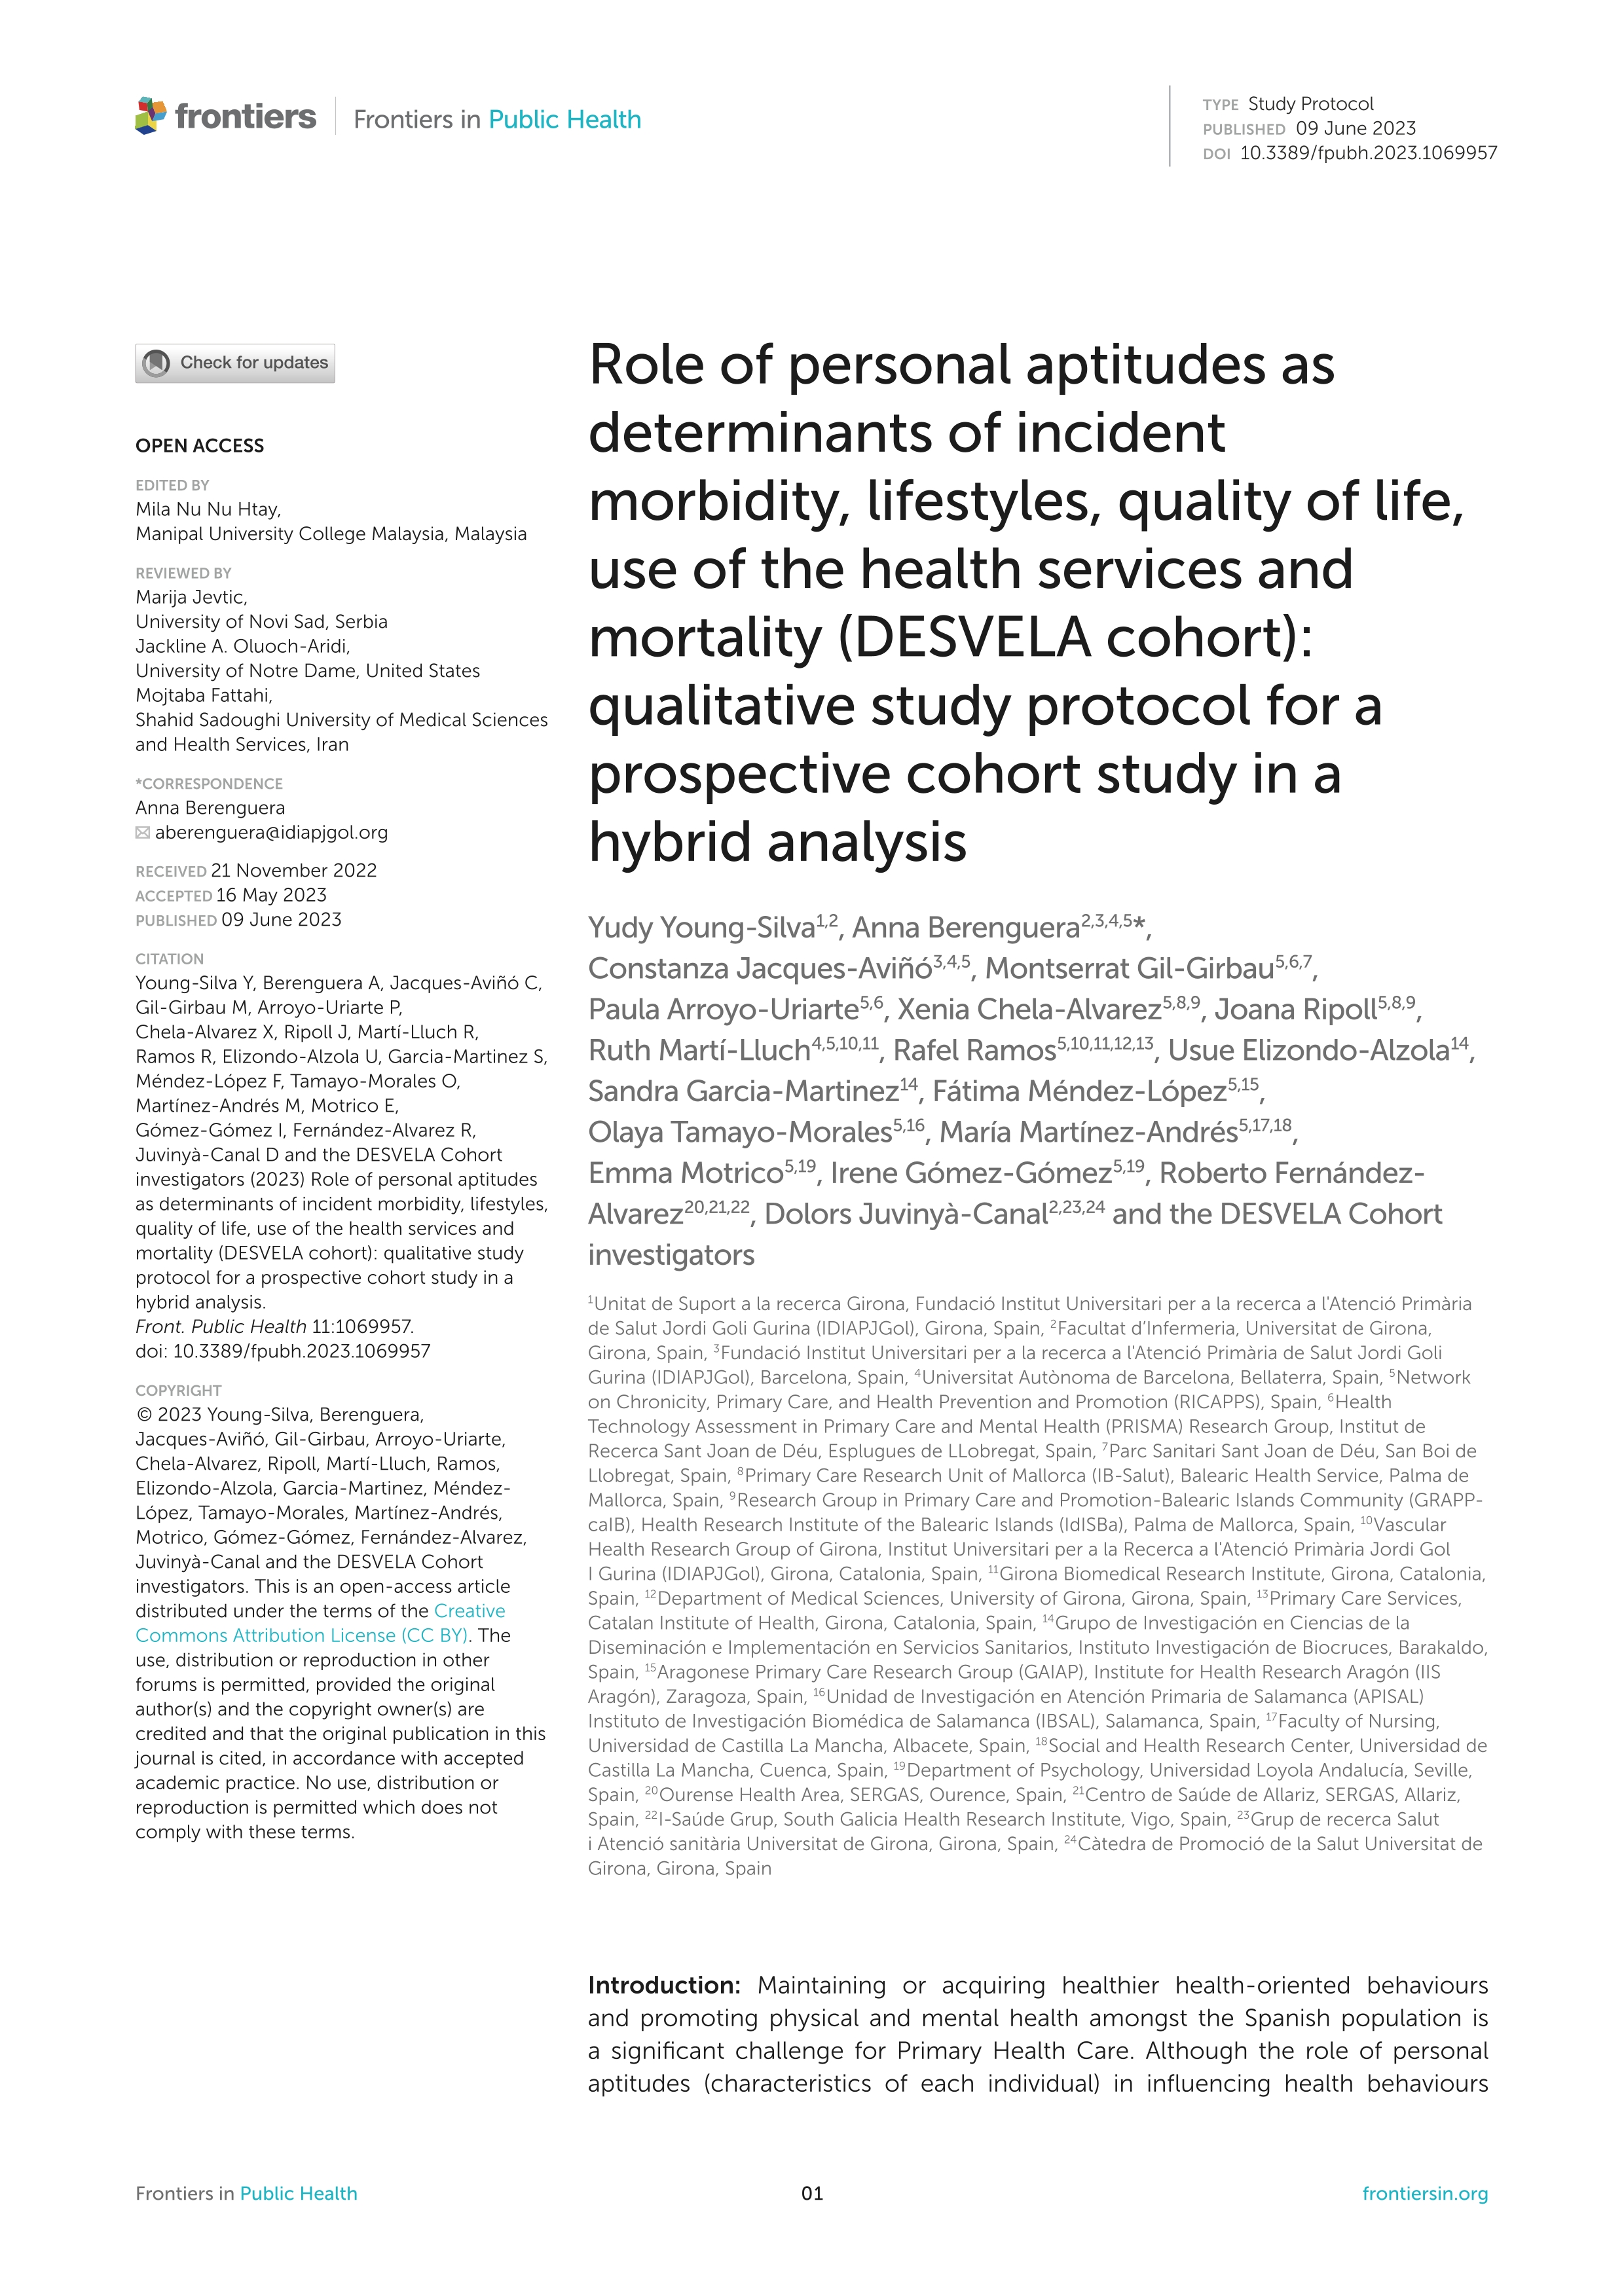 Role of personal aptitudes as determinants of incident morbidity, lifestyles, quality of life, use of the health services and mortality (DESVELA cohort): qualitative study protocol for a prospective cohort study in a hybrid analysis